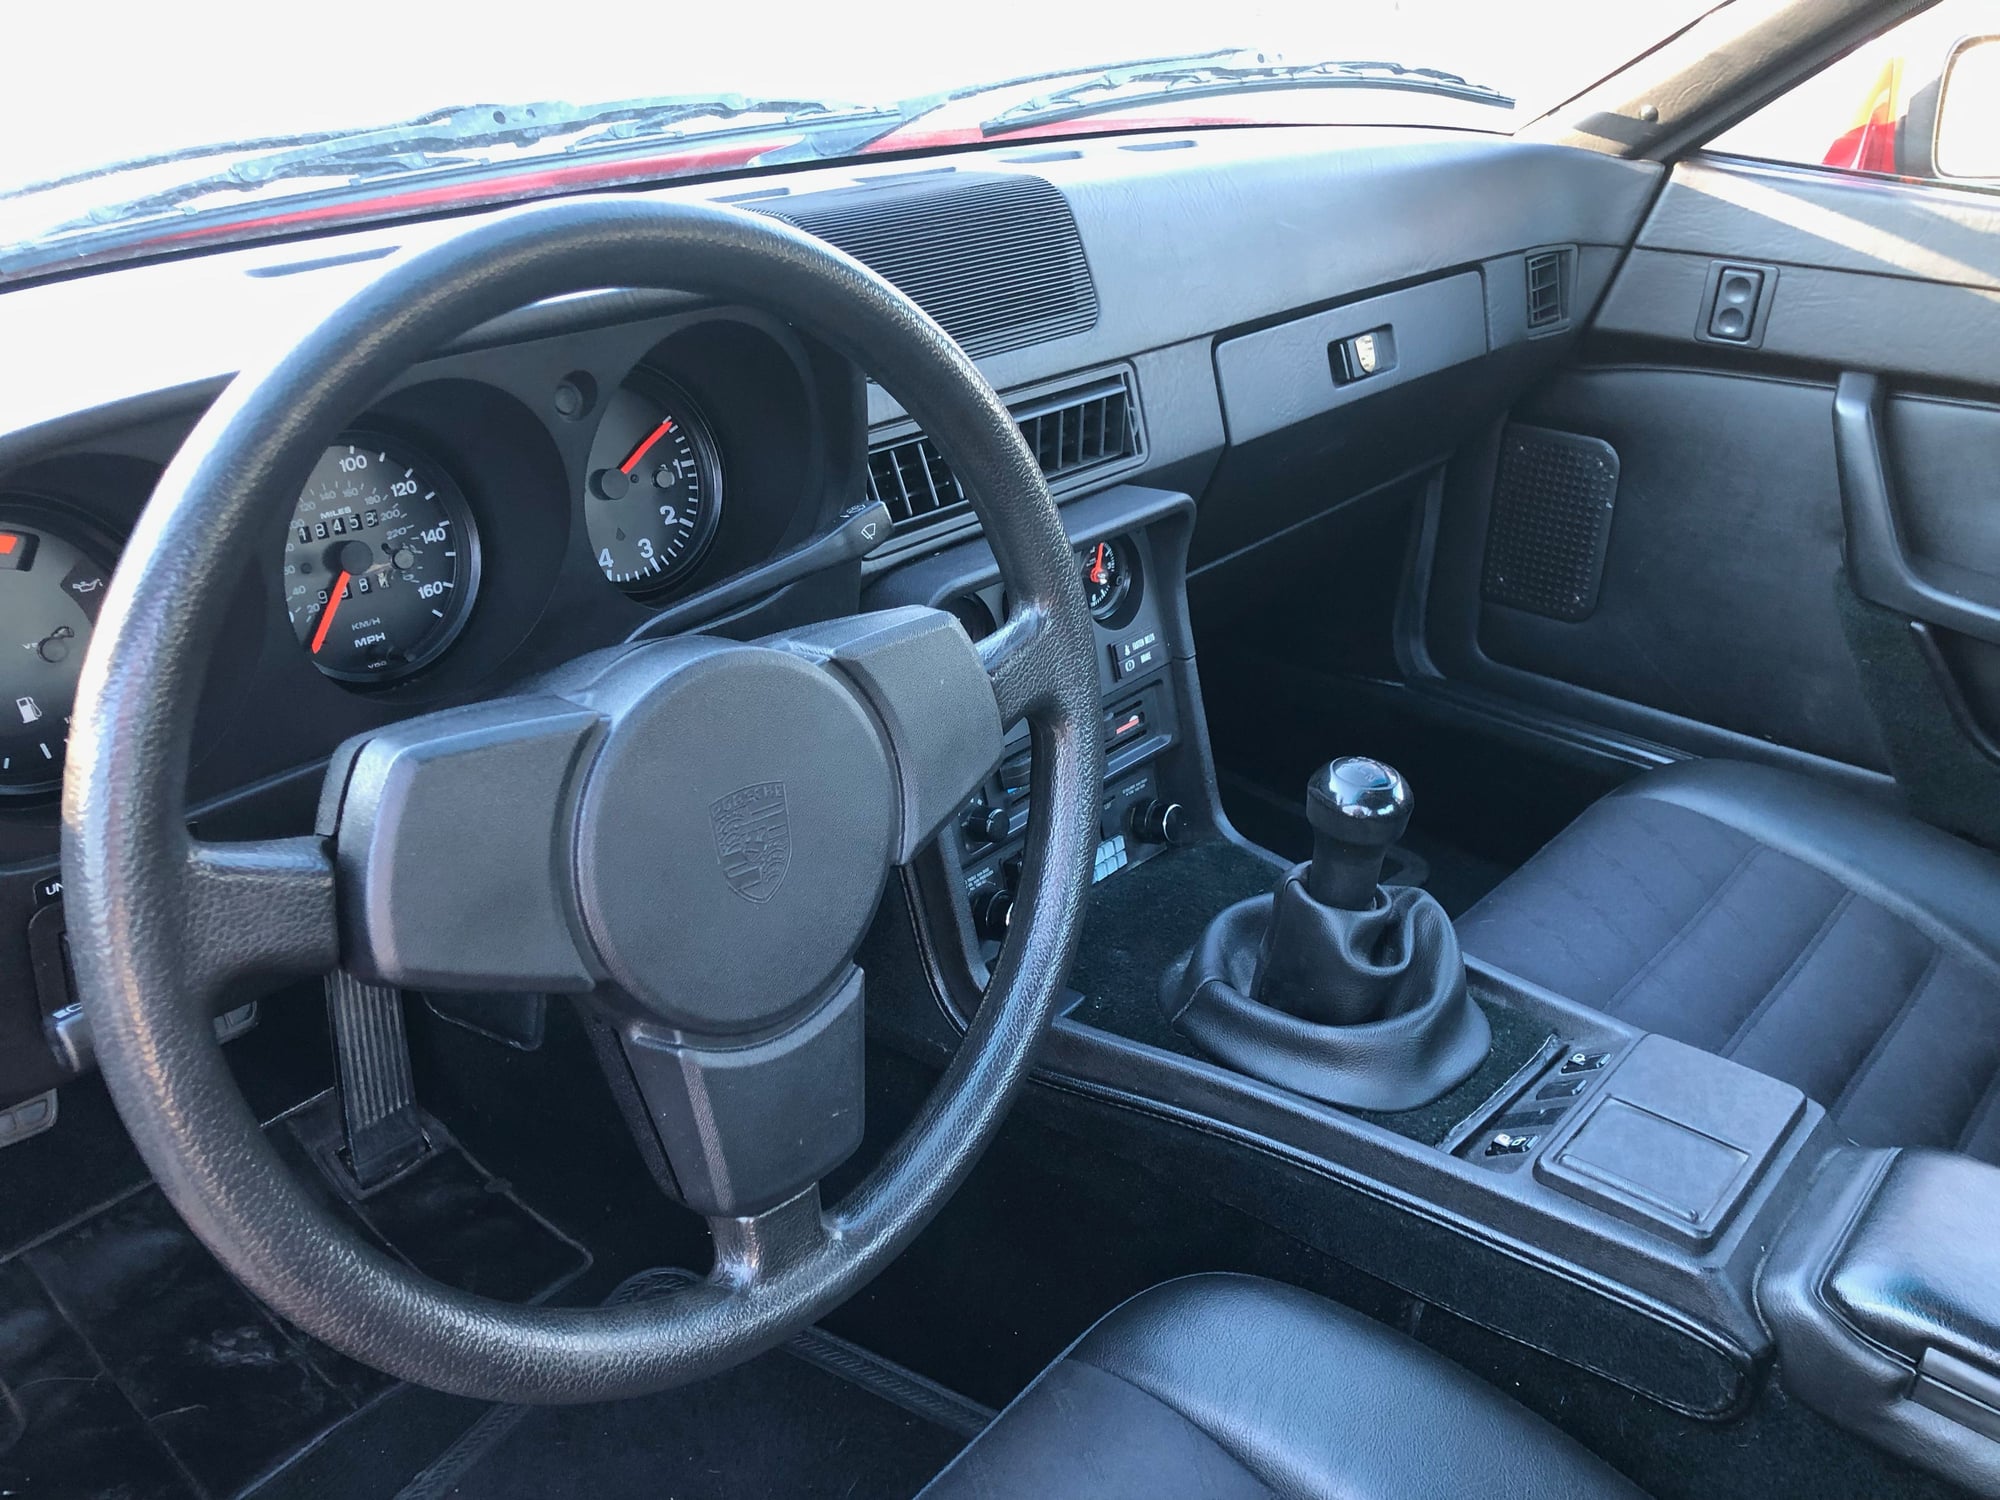 1987 Porsche 924 - 1987 Porsche 924s. Original owner. PCA member. A true original unmolested example. - Used - VIN wp0aa0926hn453477 - 118,454 Miles - 4 cyl - 2WD - Manual - Coupe - Red - Tomkins Cove, NY 10986, United States